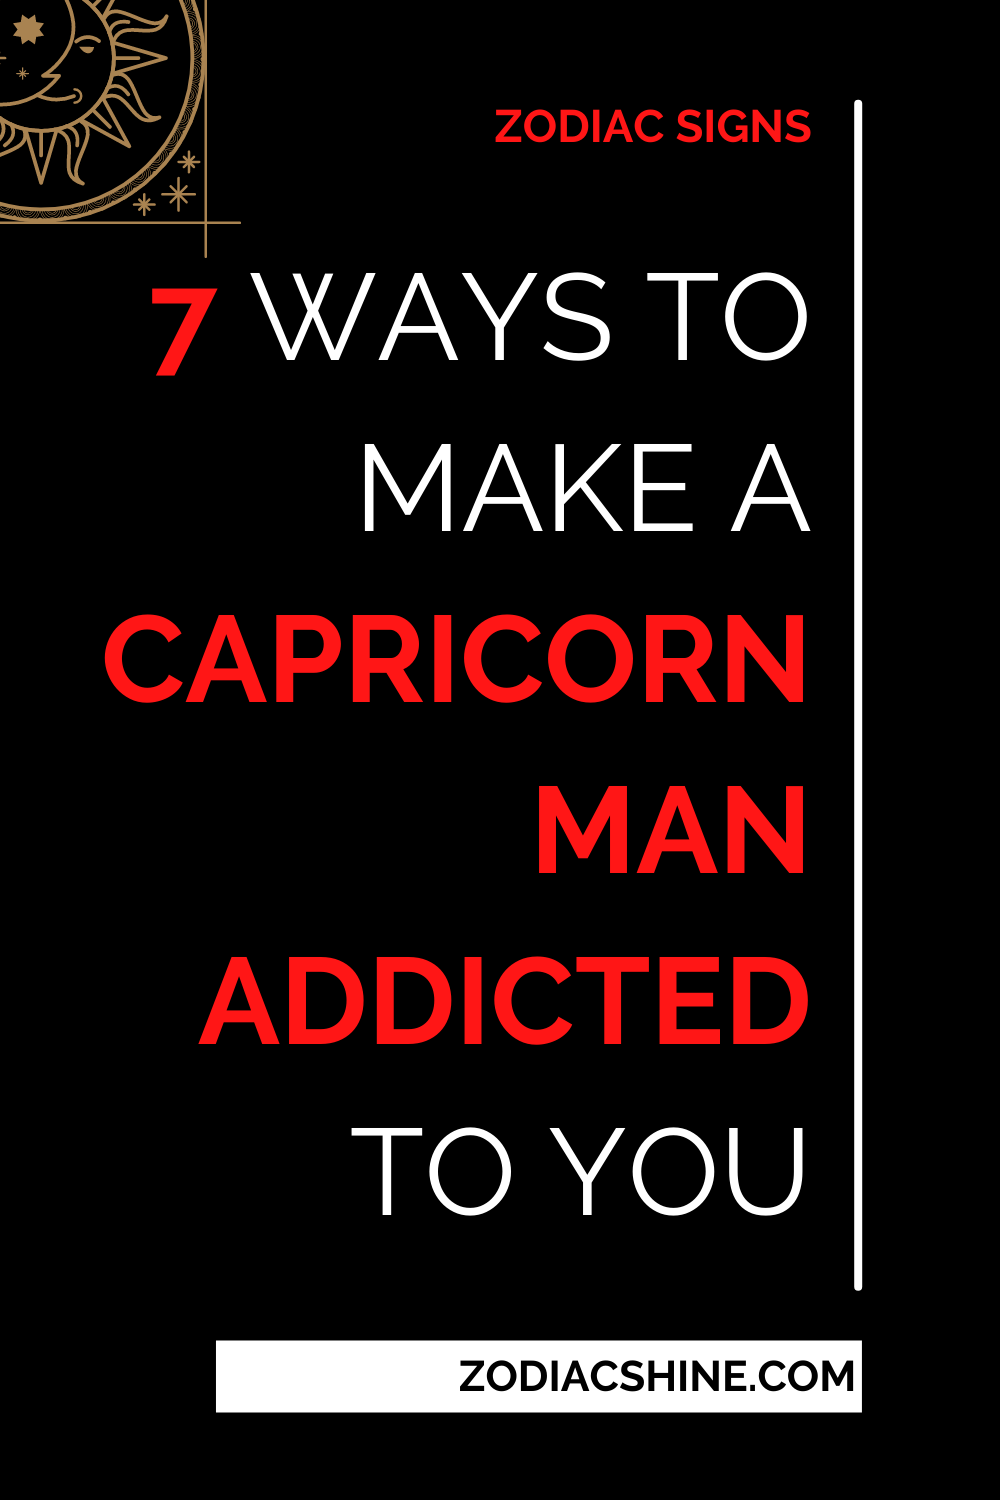 7 Ways To Make A Capricorn Man Addicted To You